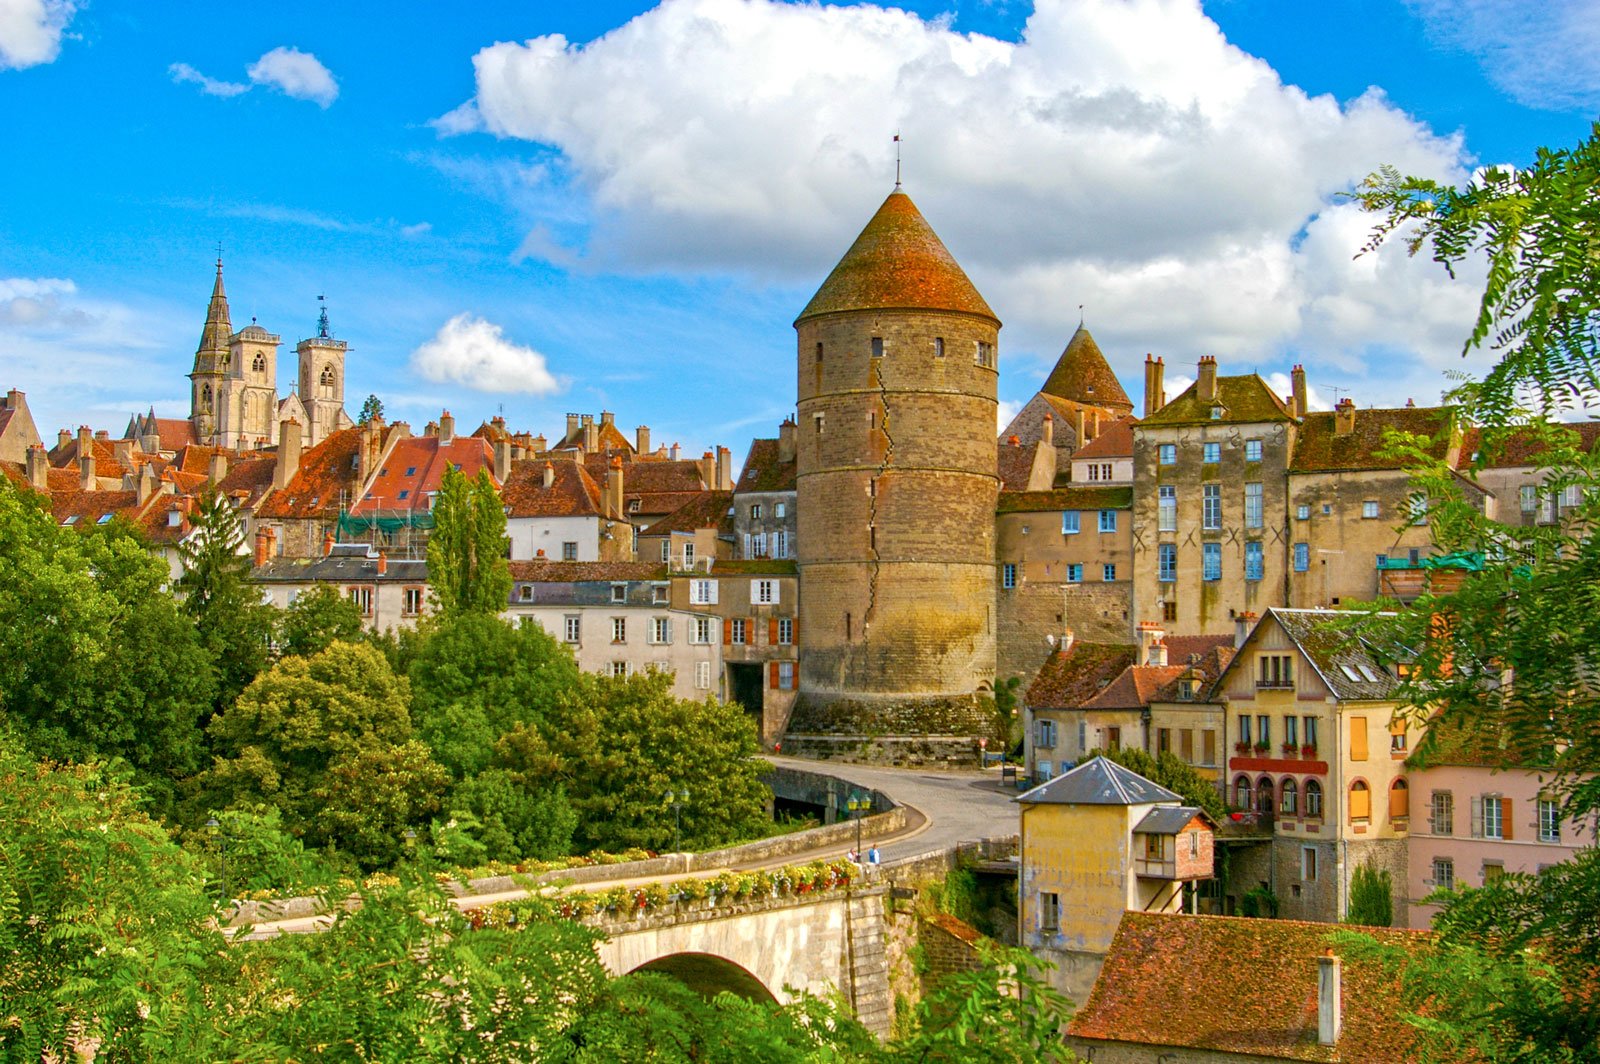 Semur-en-Auxois, with its gothic architecture and urban core wonderfully in tact